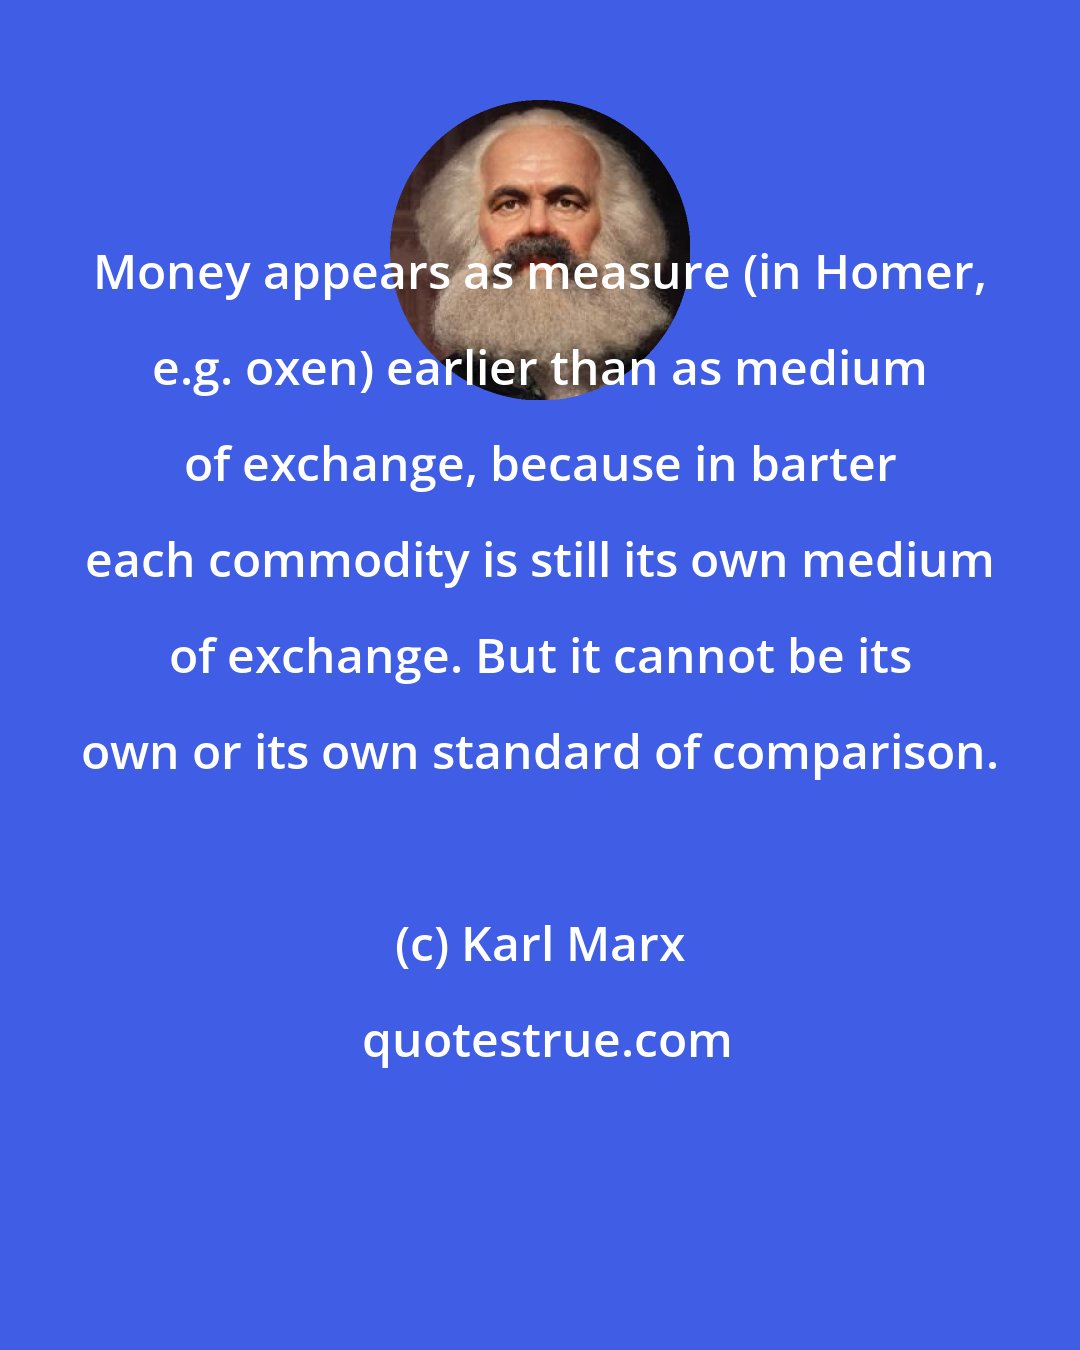 Karl Marx: Money appears as measure (in Homer, e.g. oxen) earlier than as medium of exchange, because in barter each commodity is still its own medium of exchange. But it cannot be its own or its own standard of comparison.